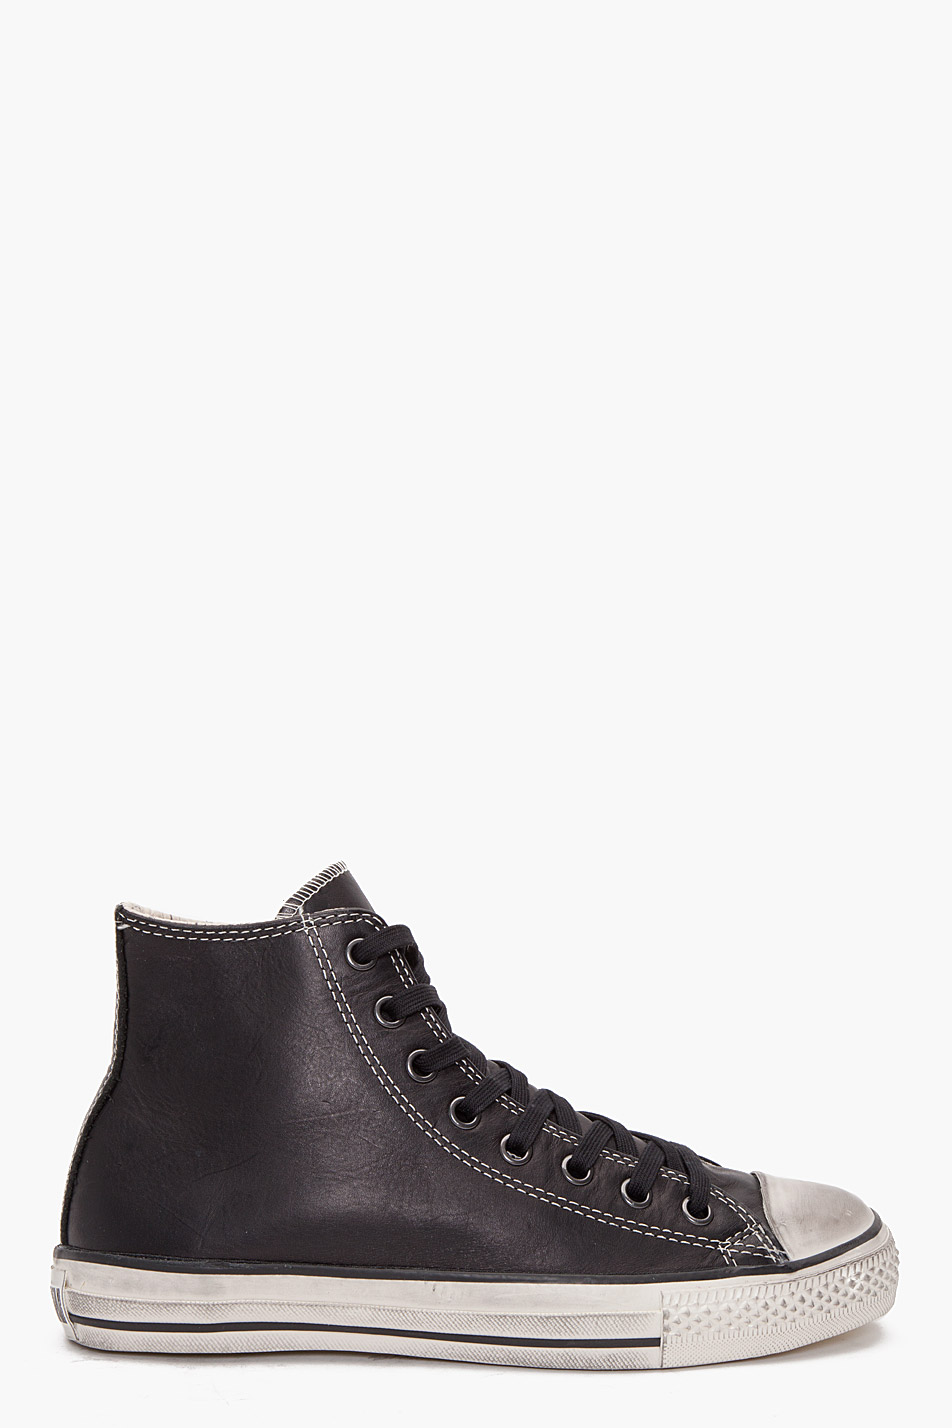 Converse Chuck Taylor Leather Hi Sneakers in Black for Men | Lyst